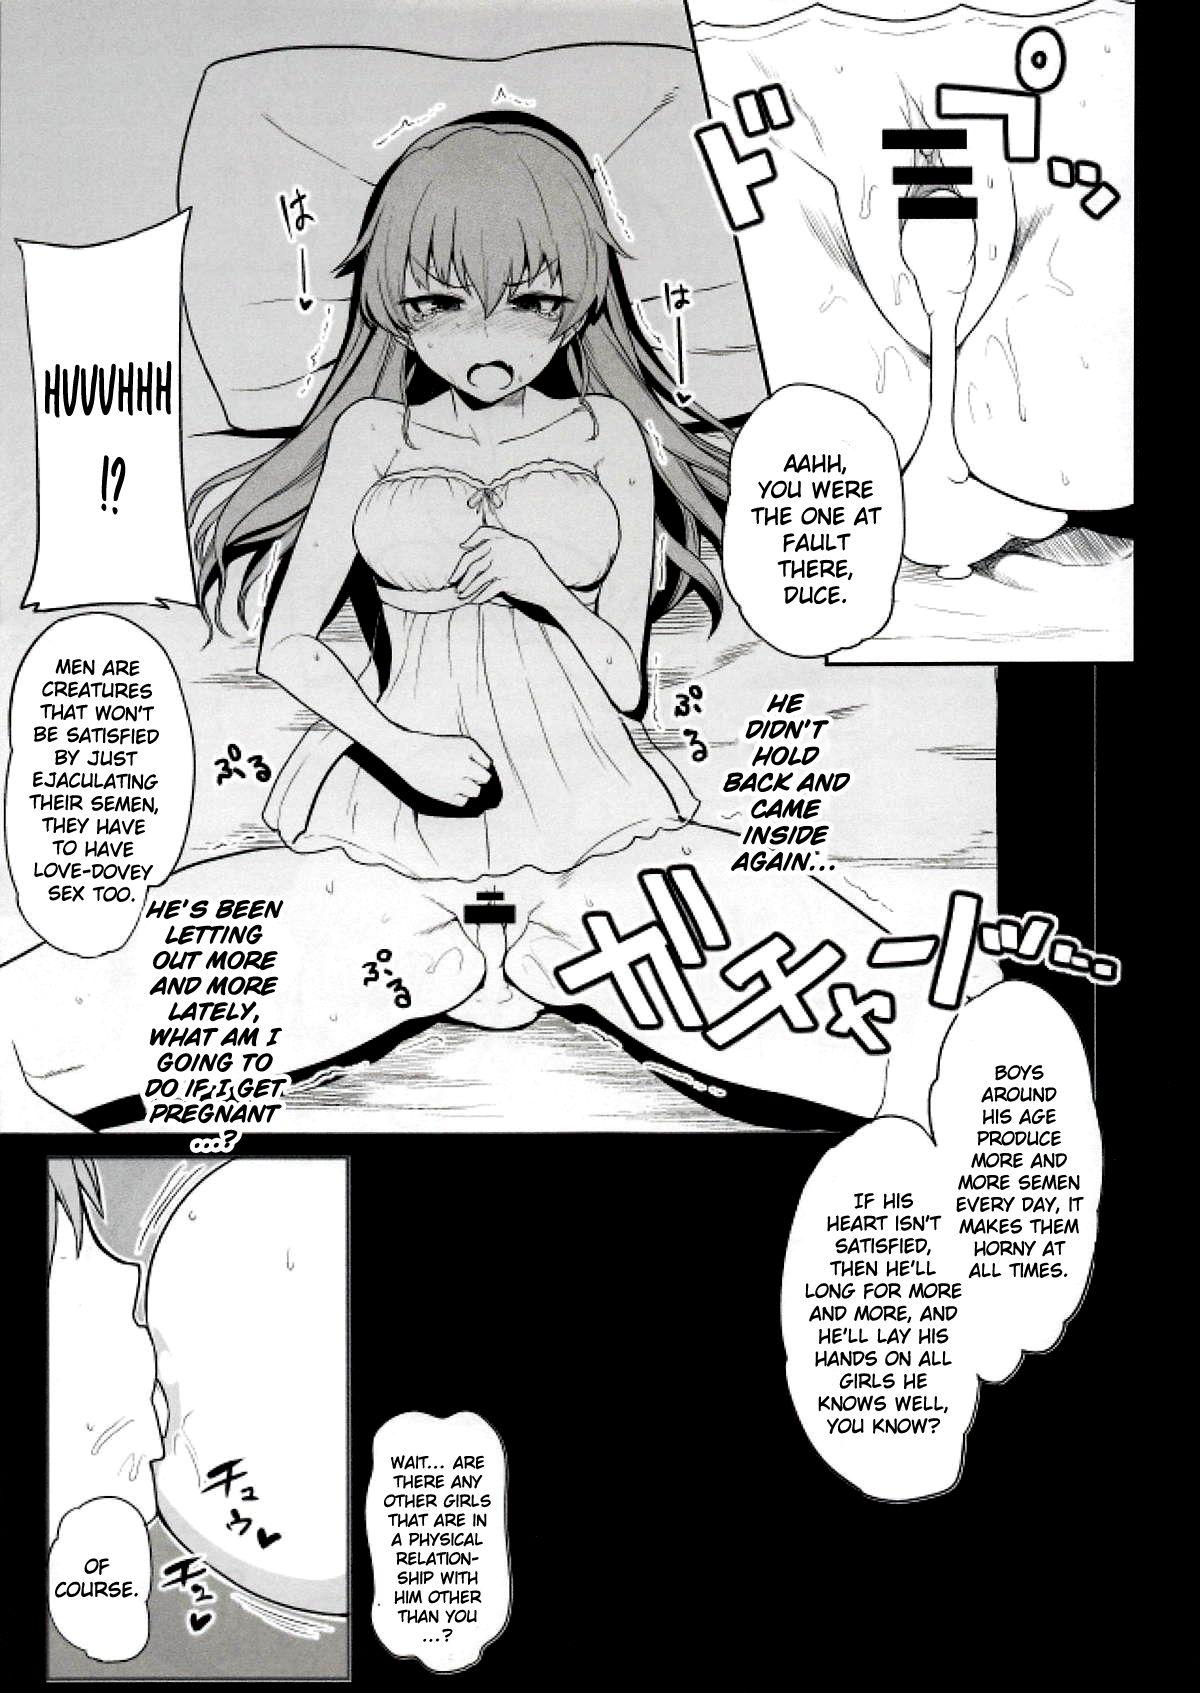 Creampies Raise wa Duce no Otouto ni Naritai | I Want To Become Duce's Little Brother In The Future! - Girls und panzer Groupfuck - Page 5